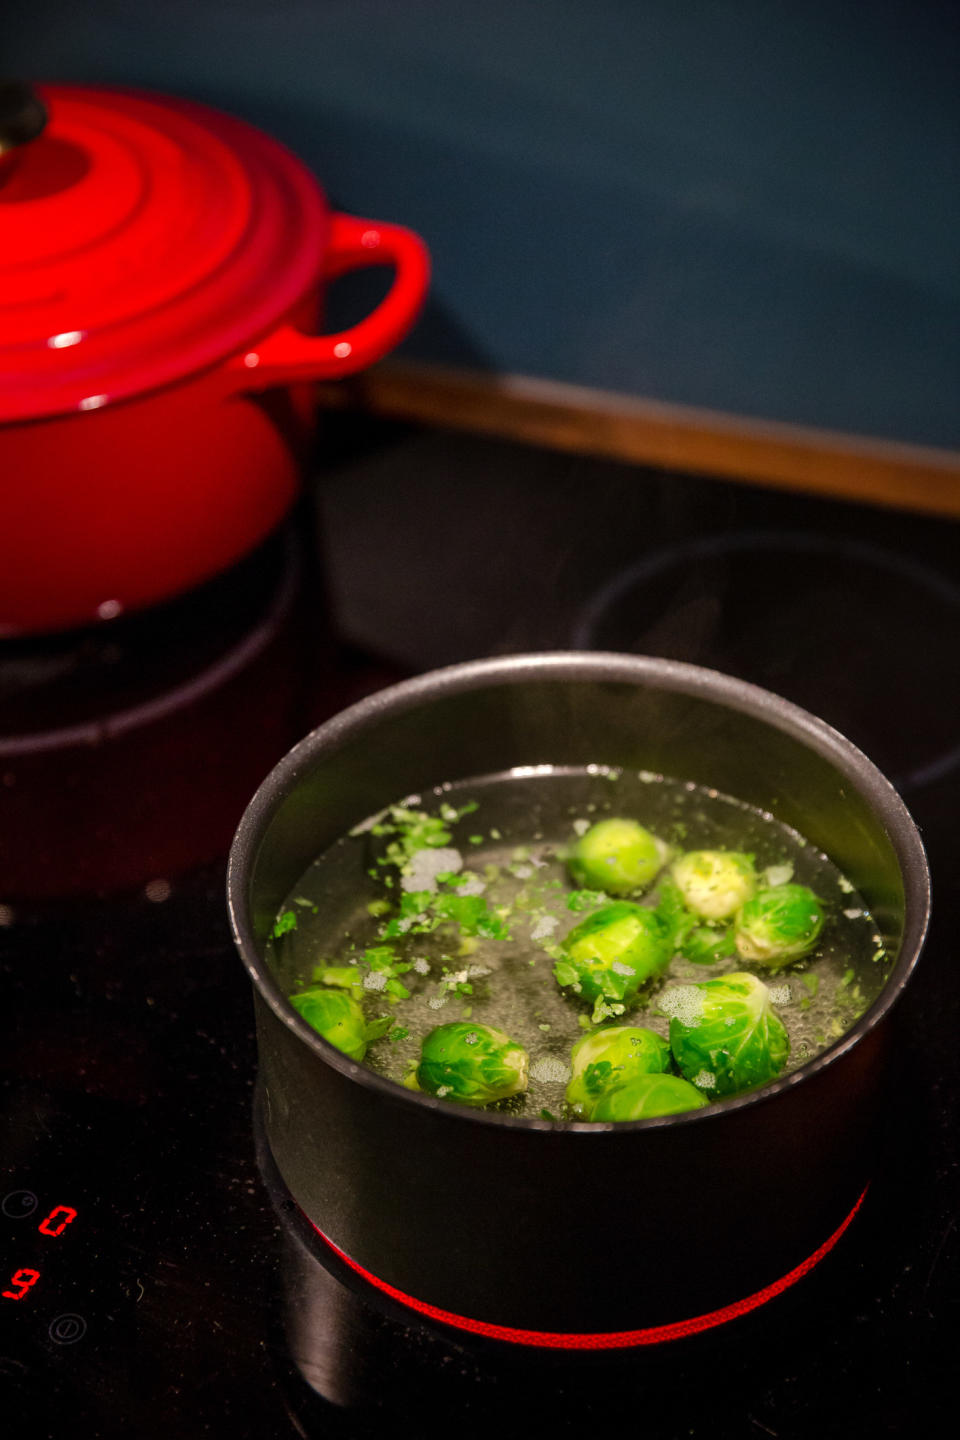 Boiled Brussels sprouts